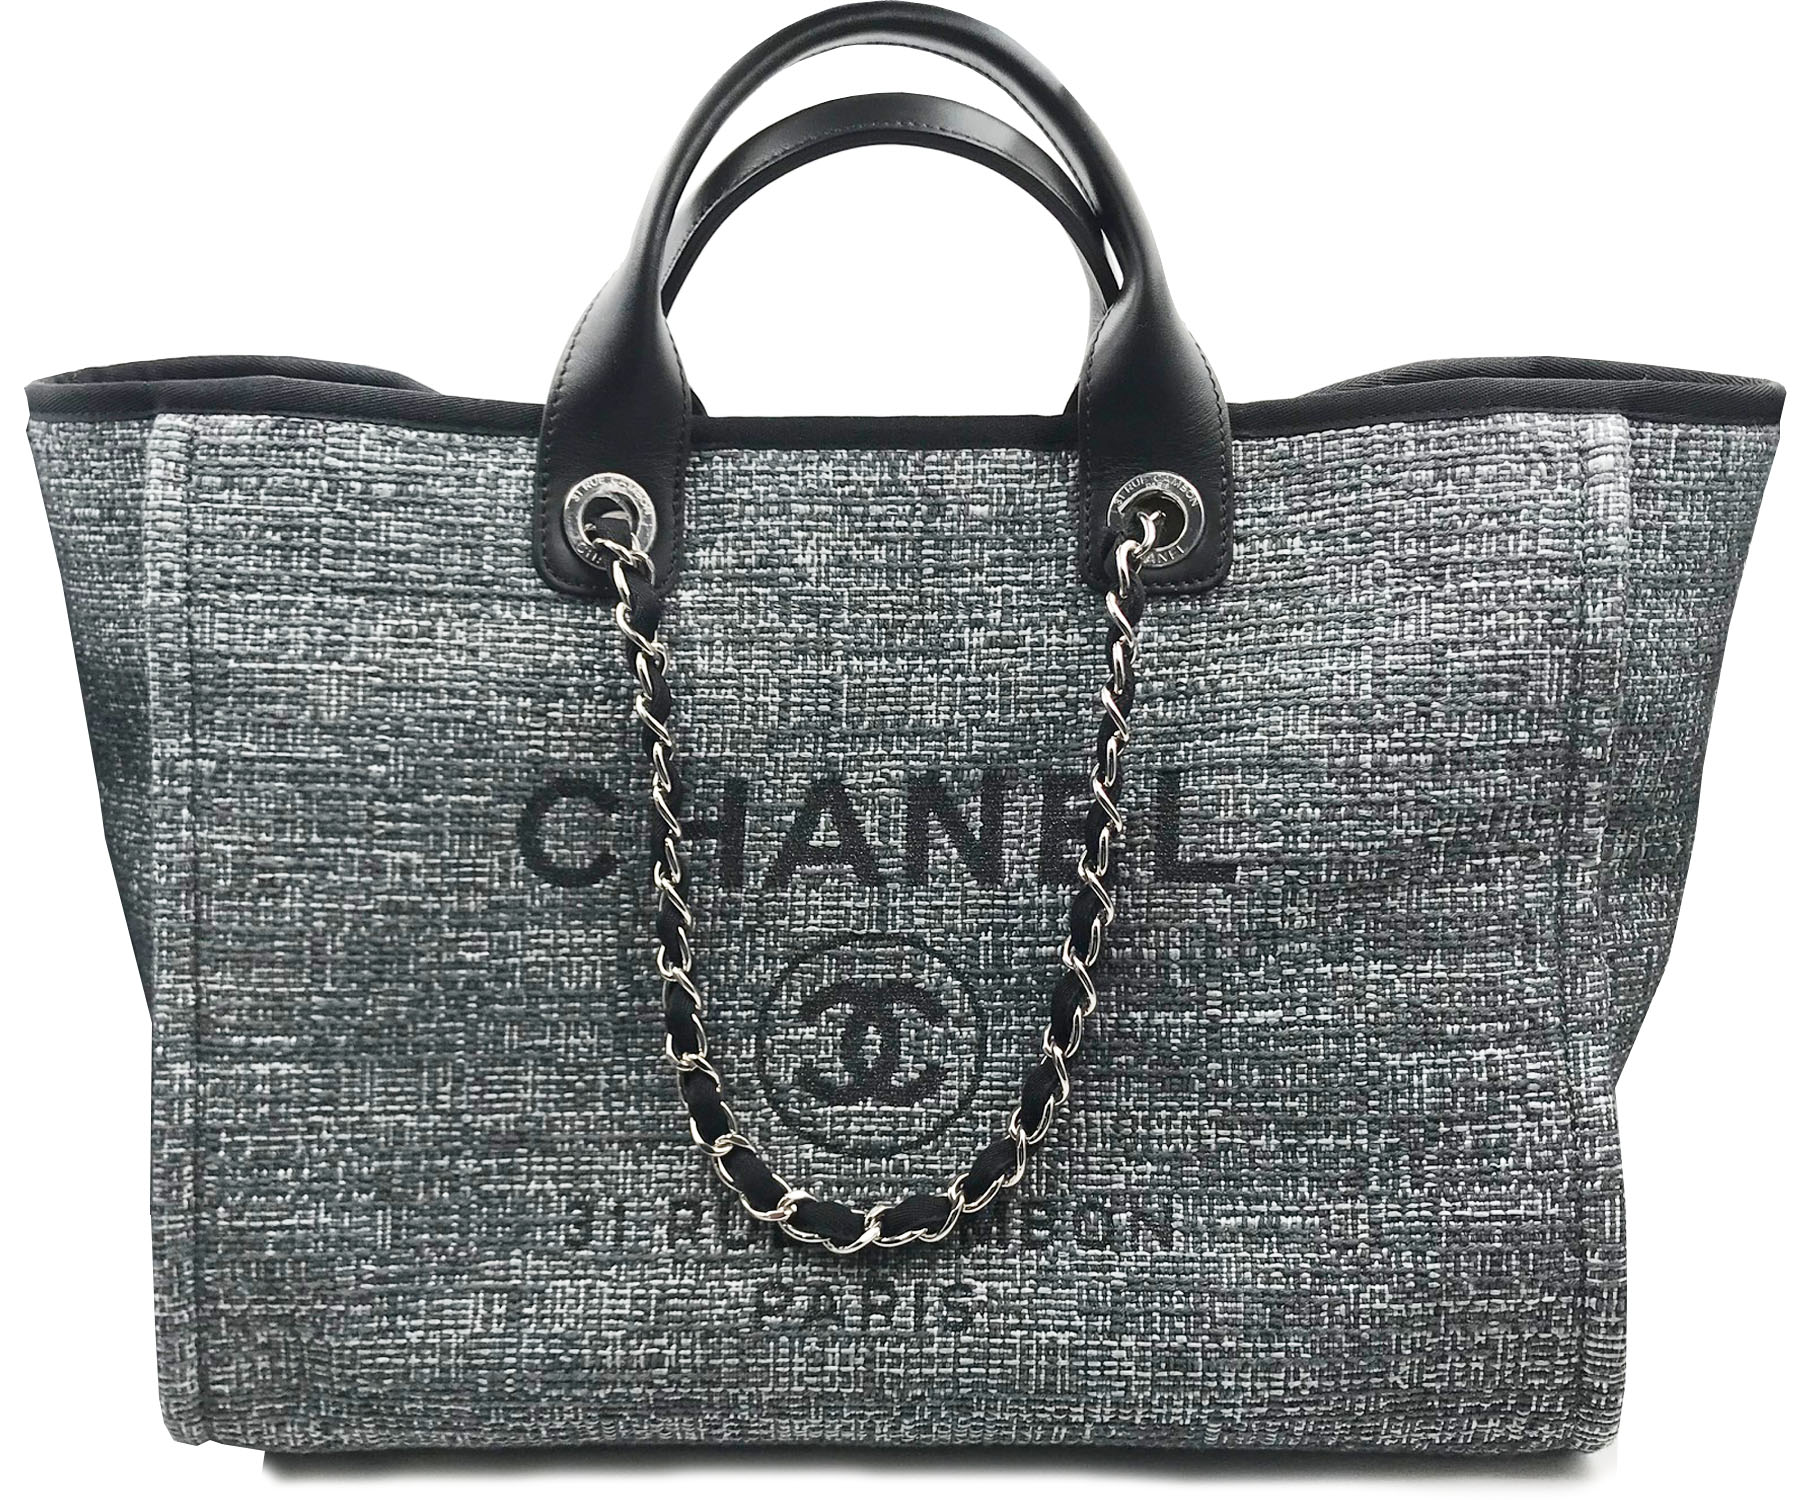 Chanel Handbags: A Symphony of Luxury and Timeless Chic